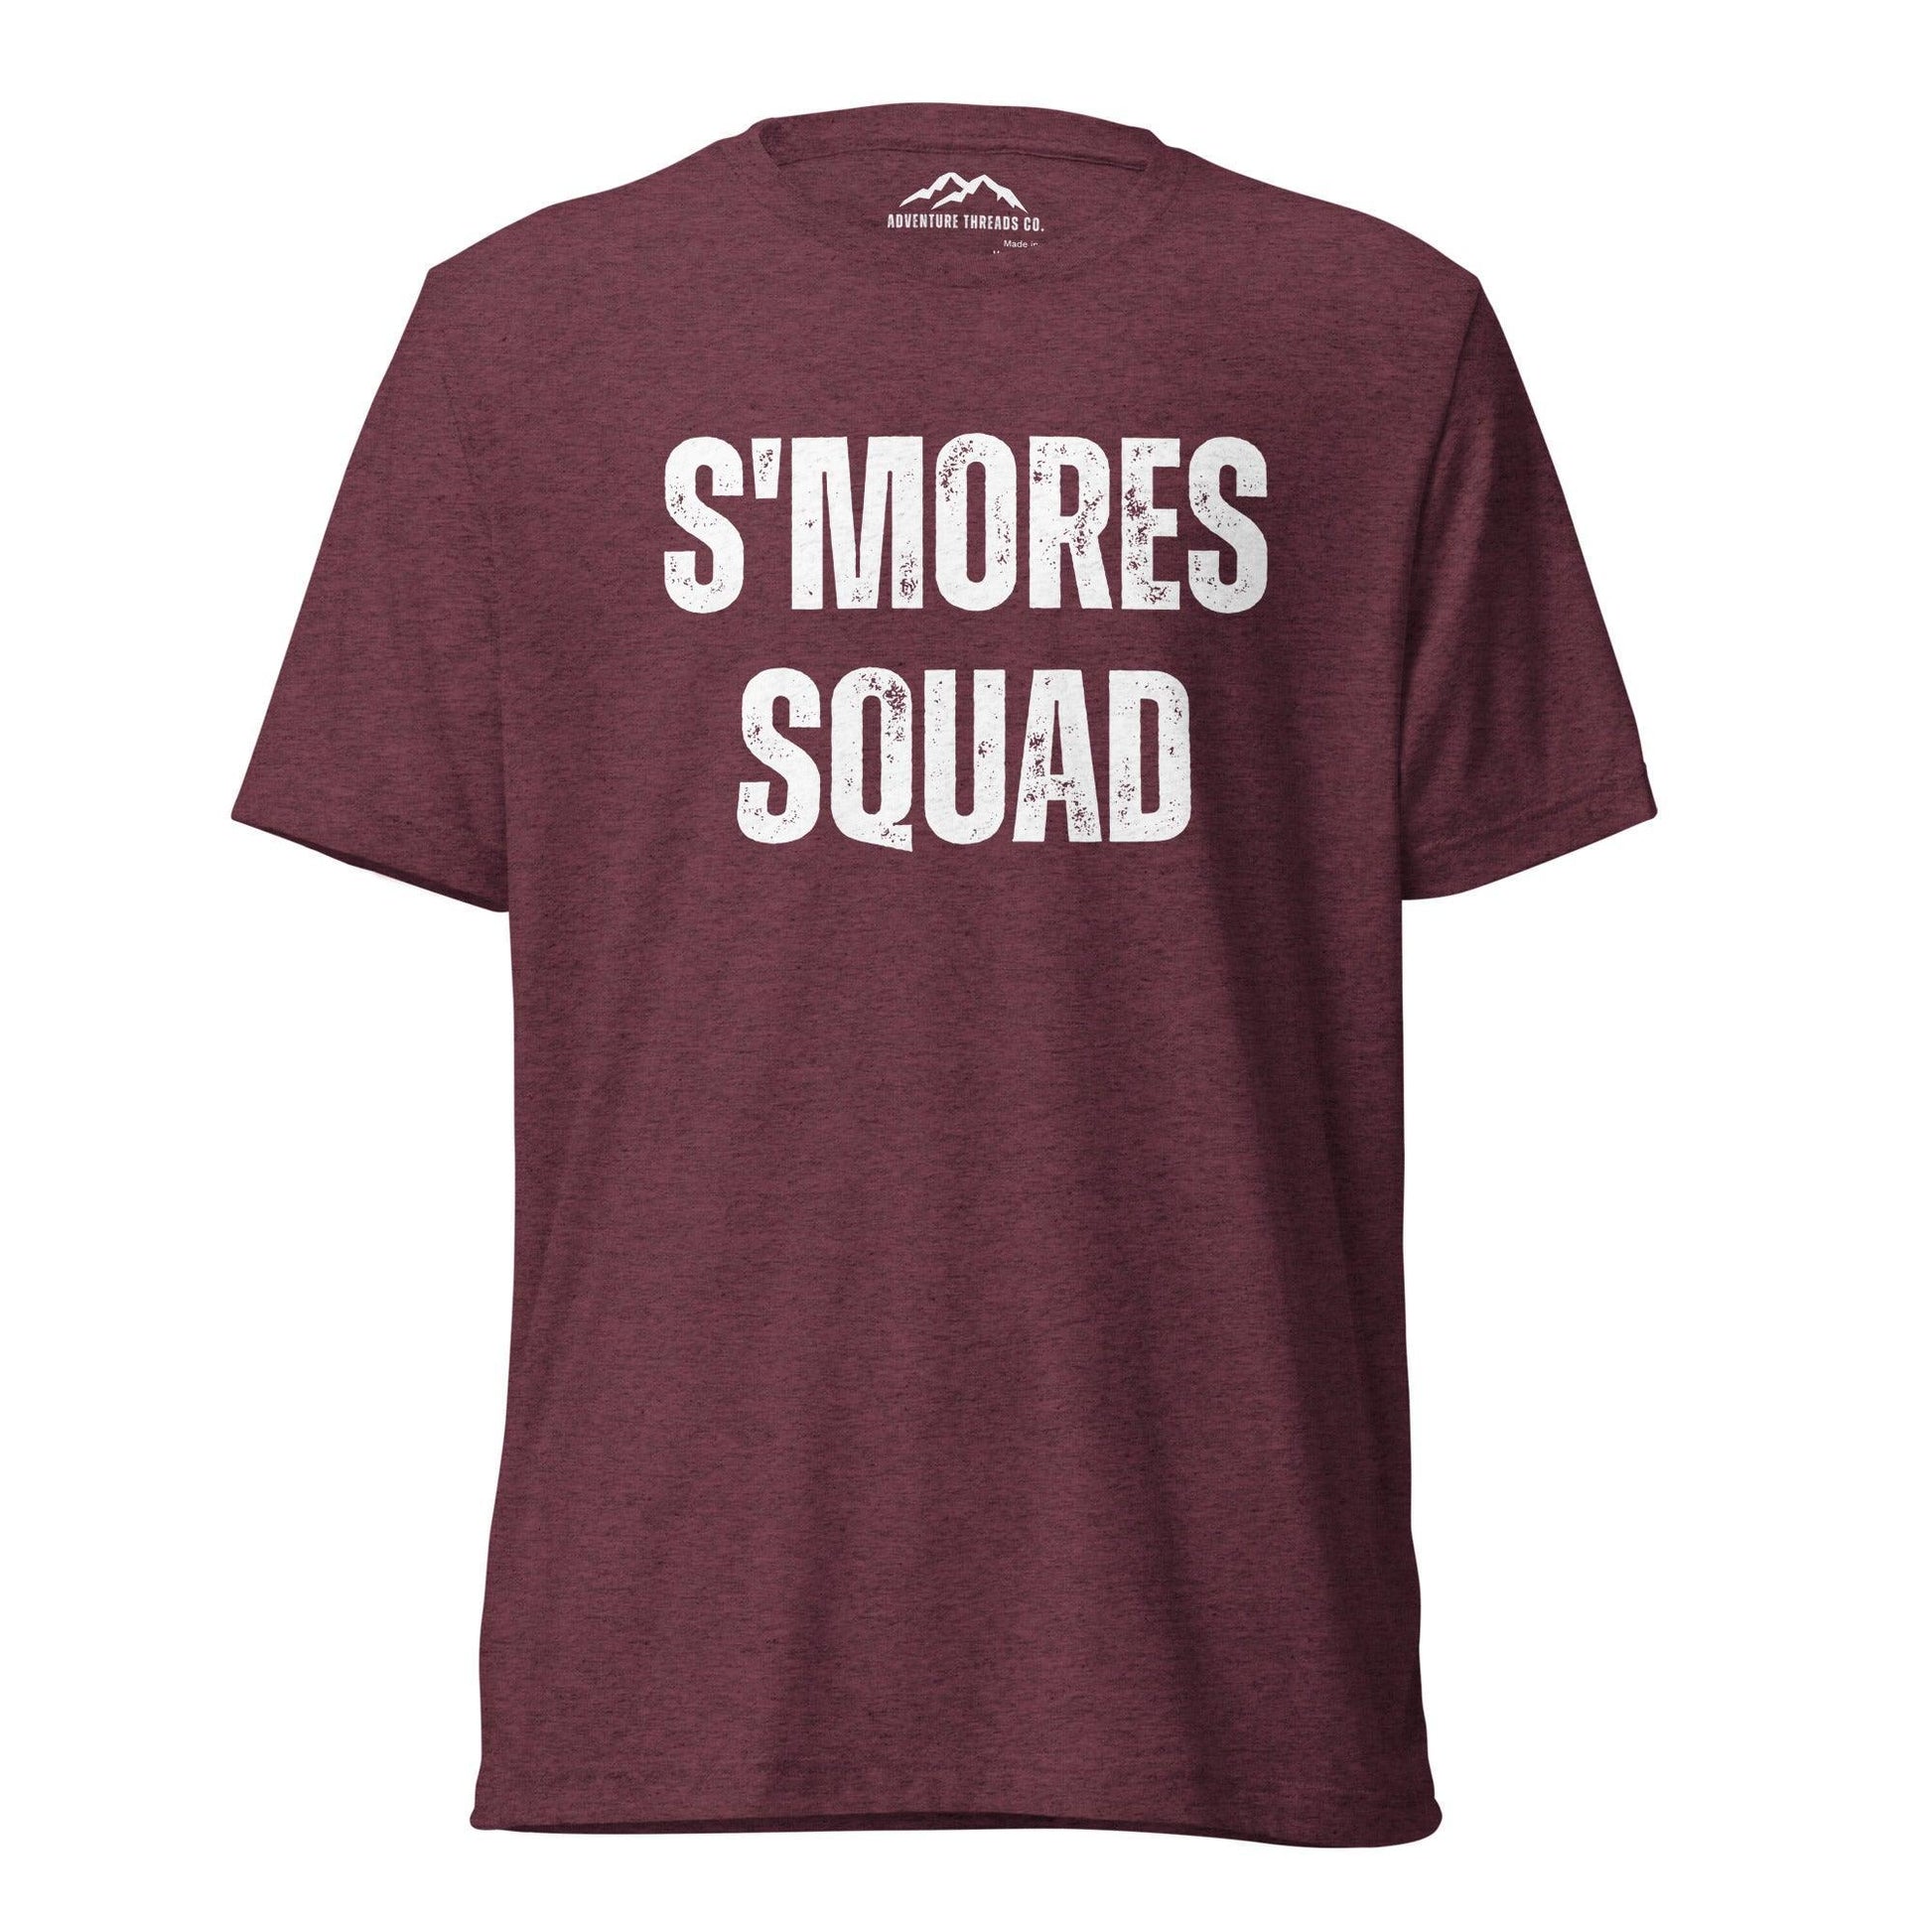 S'mores Squad Tri-Blend T-Shirt - Adventure Threads Company